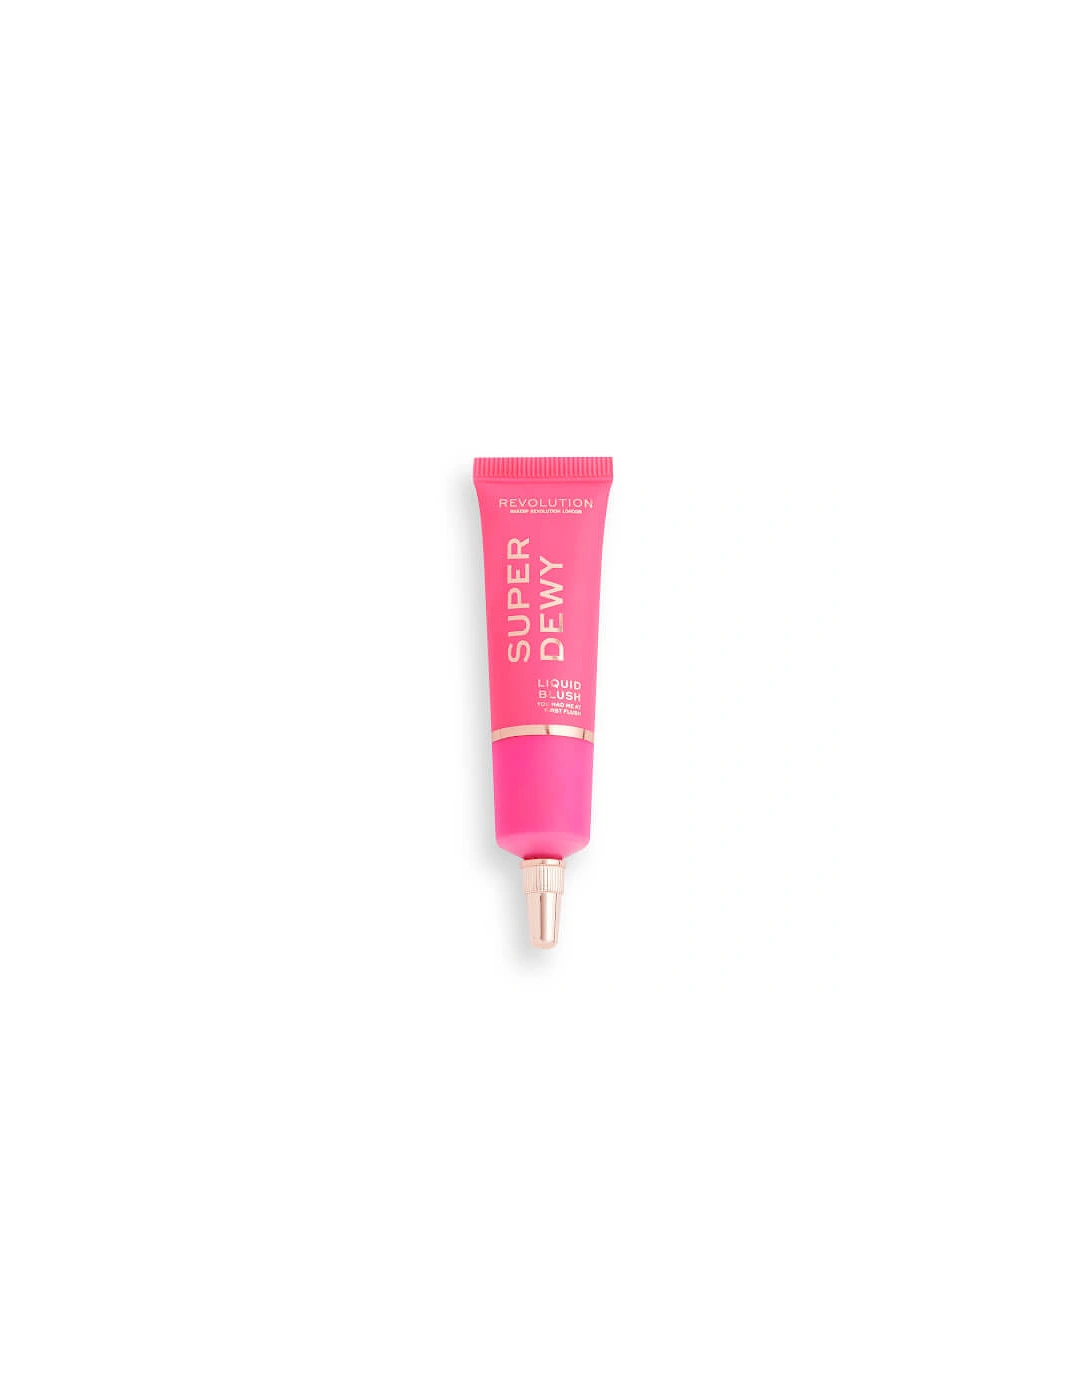 Makeup Superdewy Liquid Blush 15ml - You Had Me At First Blush, 2 of 1